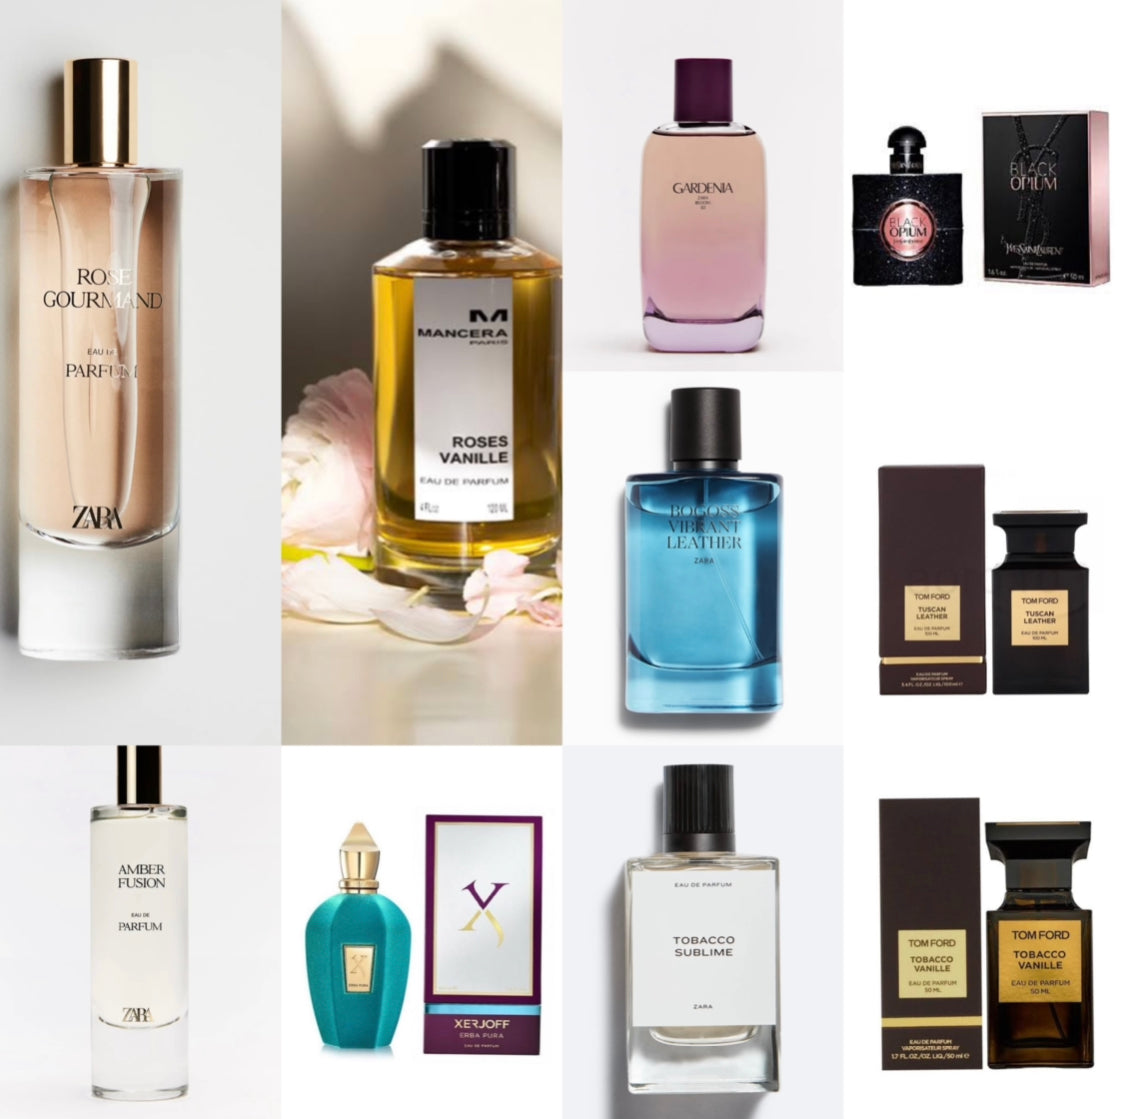 More for less? Zara has got you; 6 Zara Fragrances That Mirror High-End Luxury Scents and Will Give you Value for Money